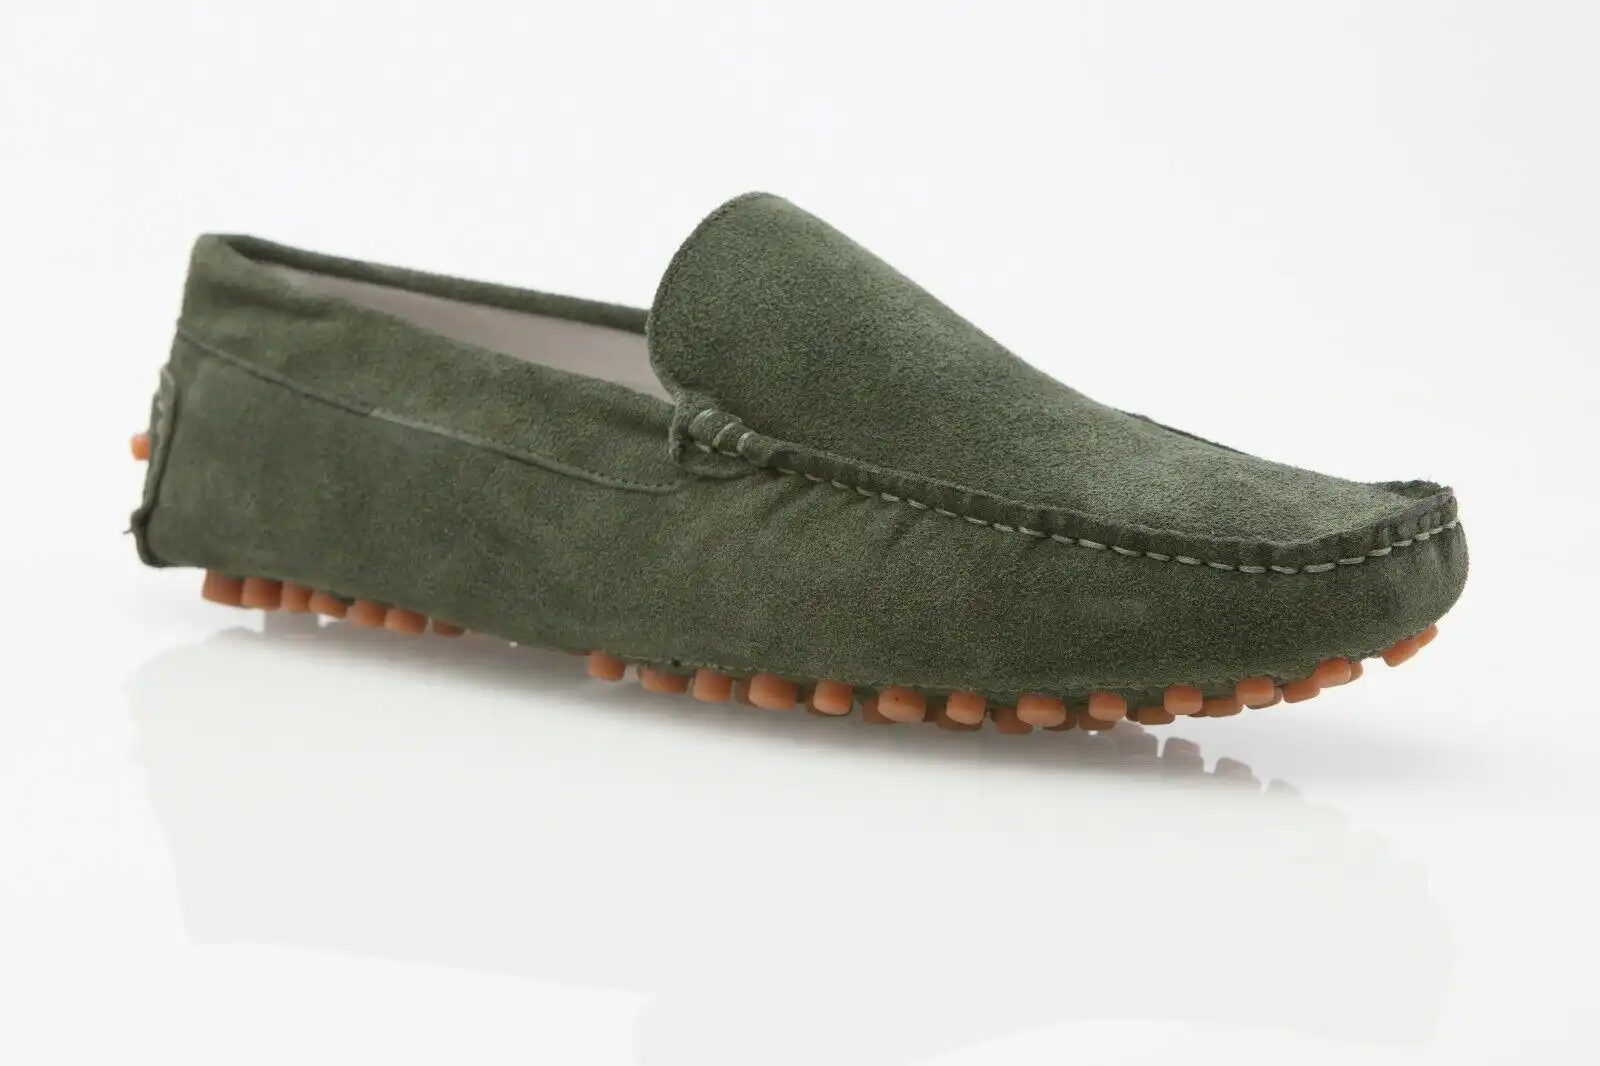 Mens Zasel Summer Boat Shoes Green Suede Casual Slip On Deck Driving Grip Loafers